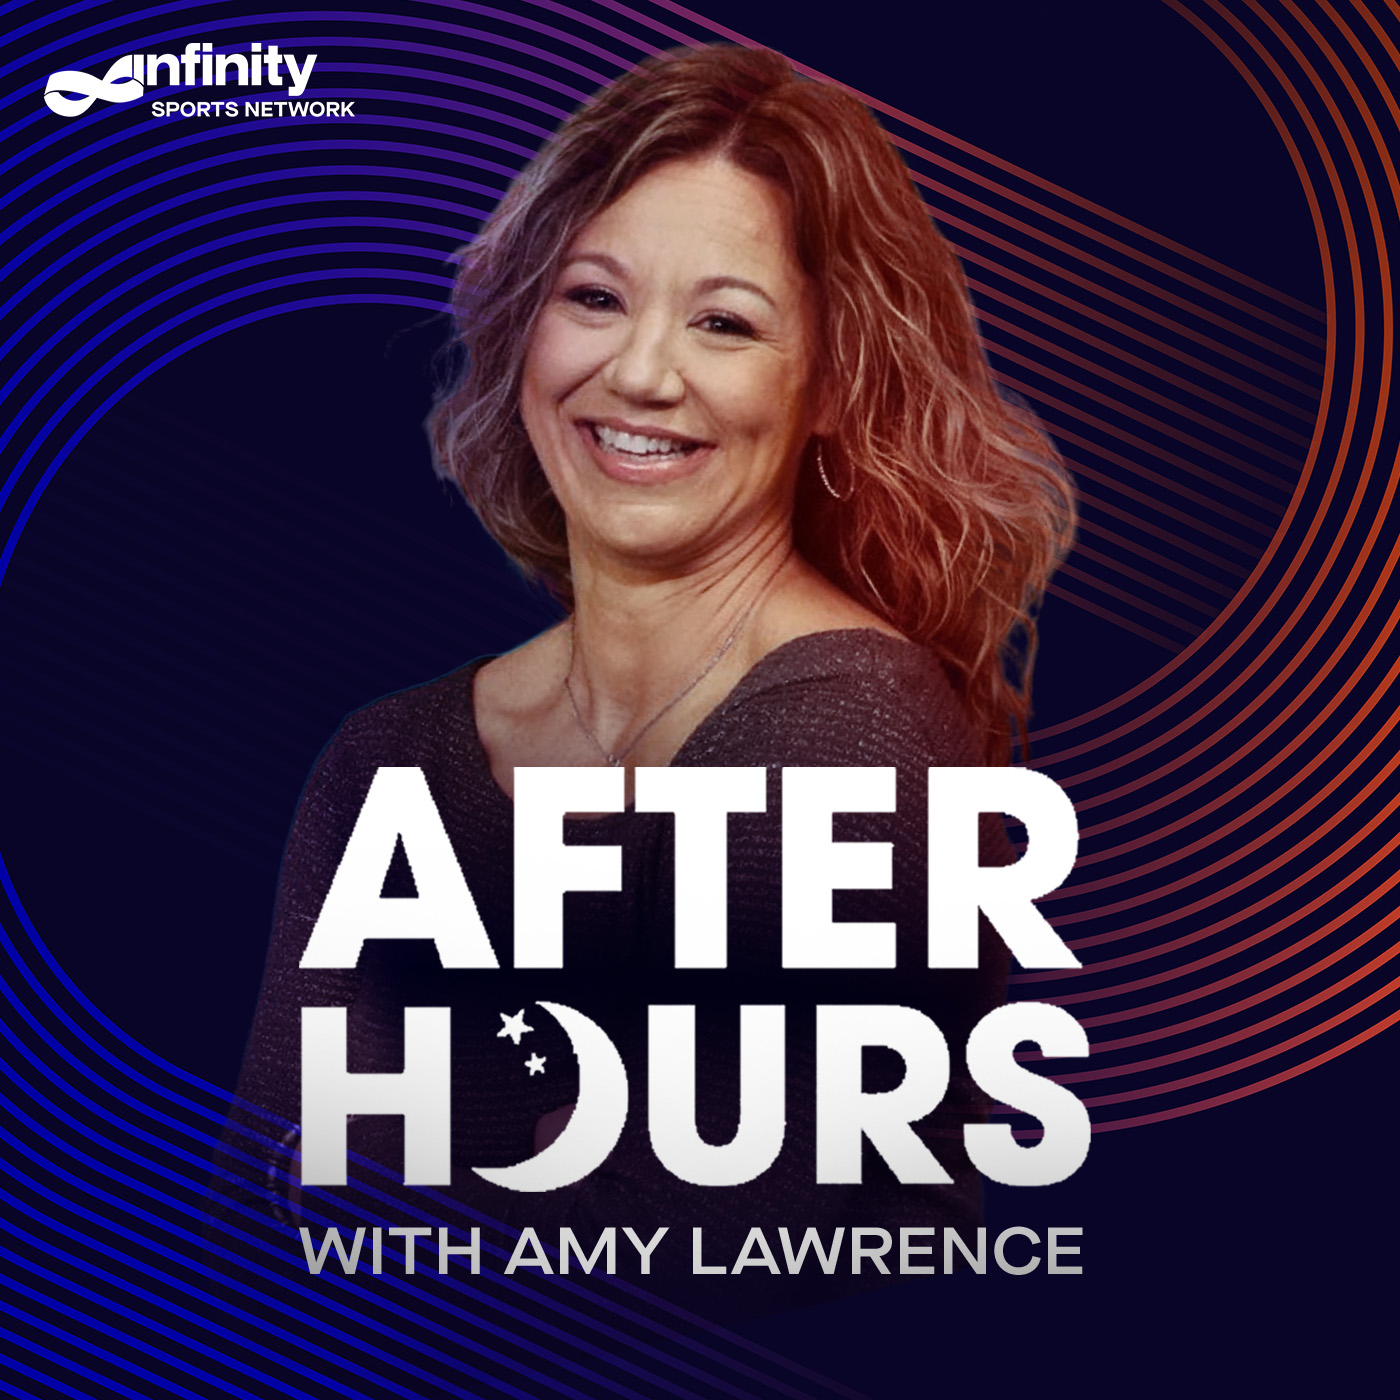 12-14-21 After Hours with Amy Lawrence PODCAST: Hour 4